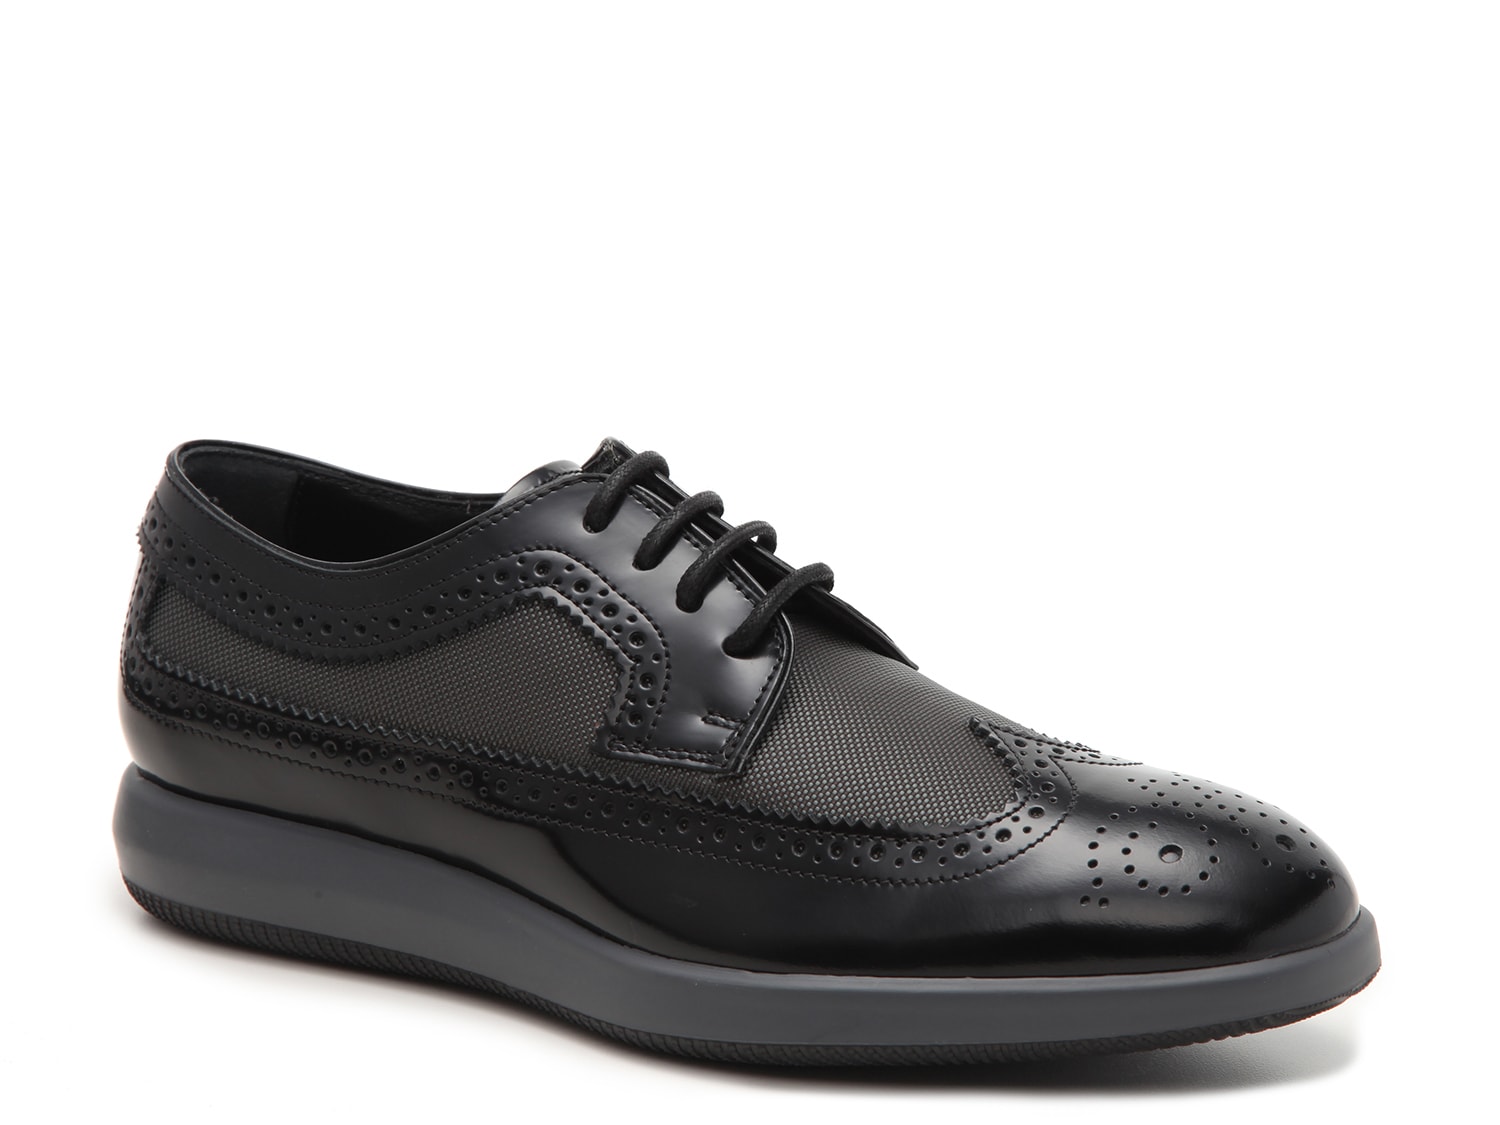 Hogan Mixed Material Wingtip Oxford - Free Shipping | DSW